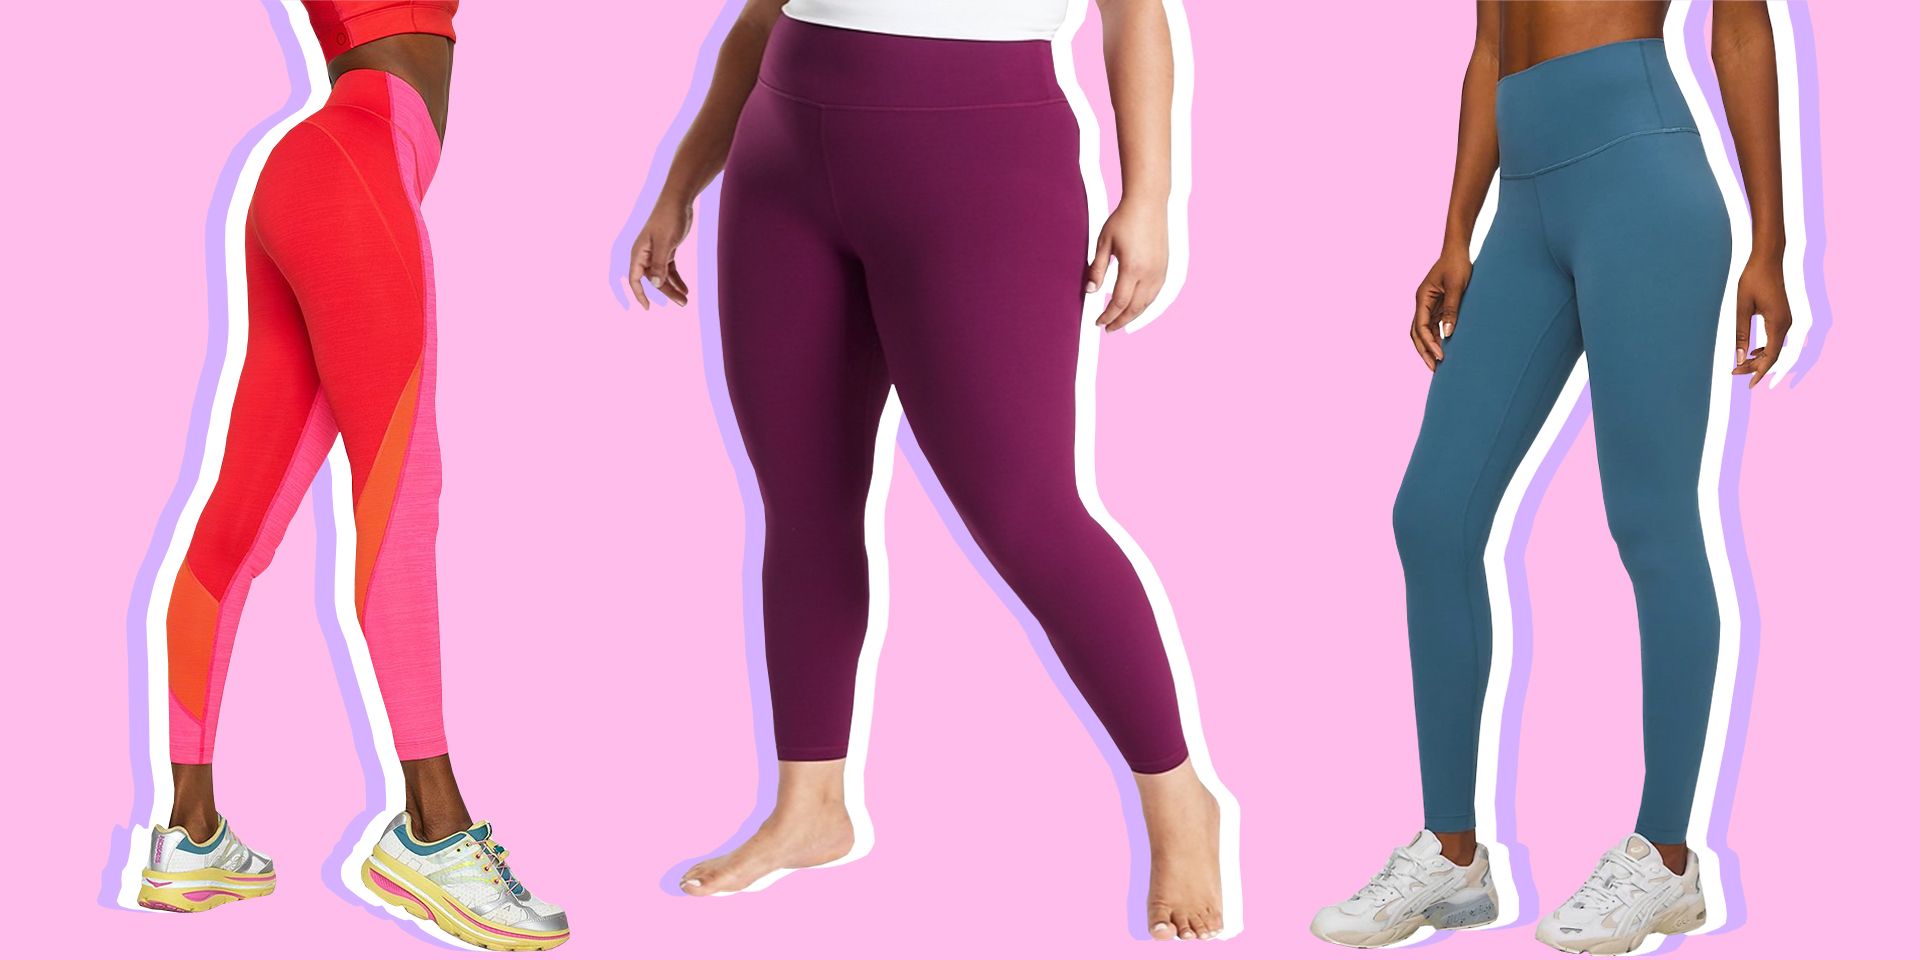 Why Are Yoga Pants So Popular?